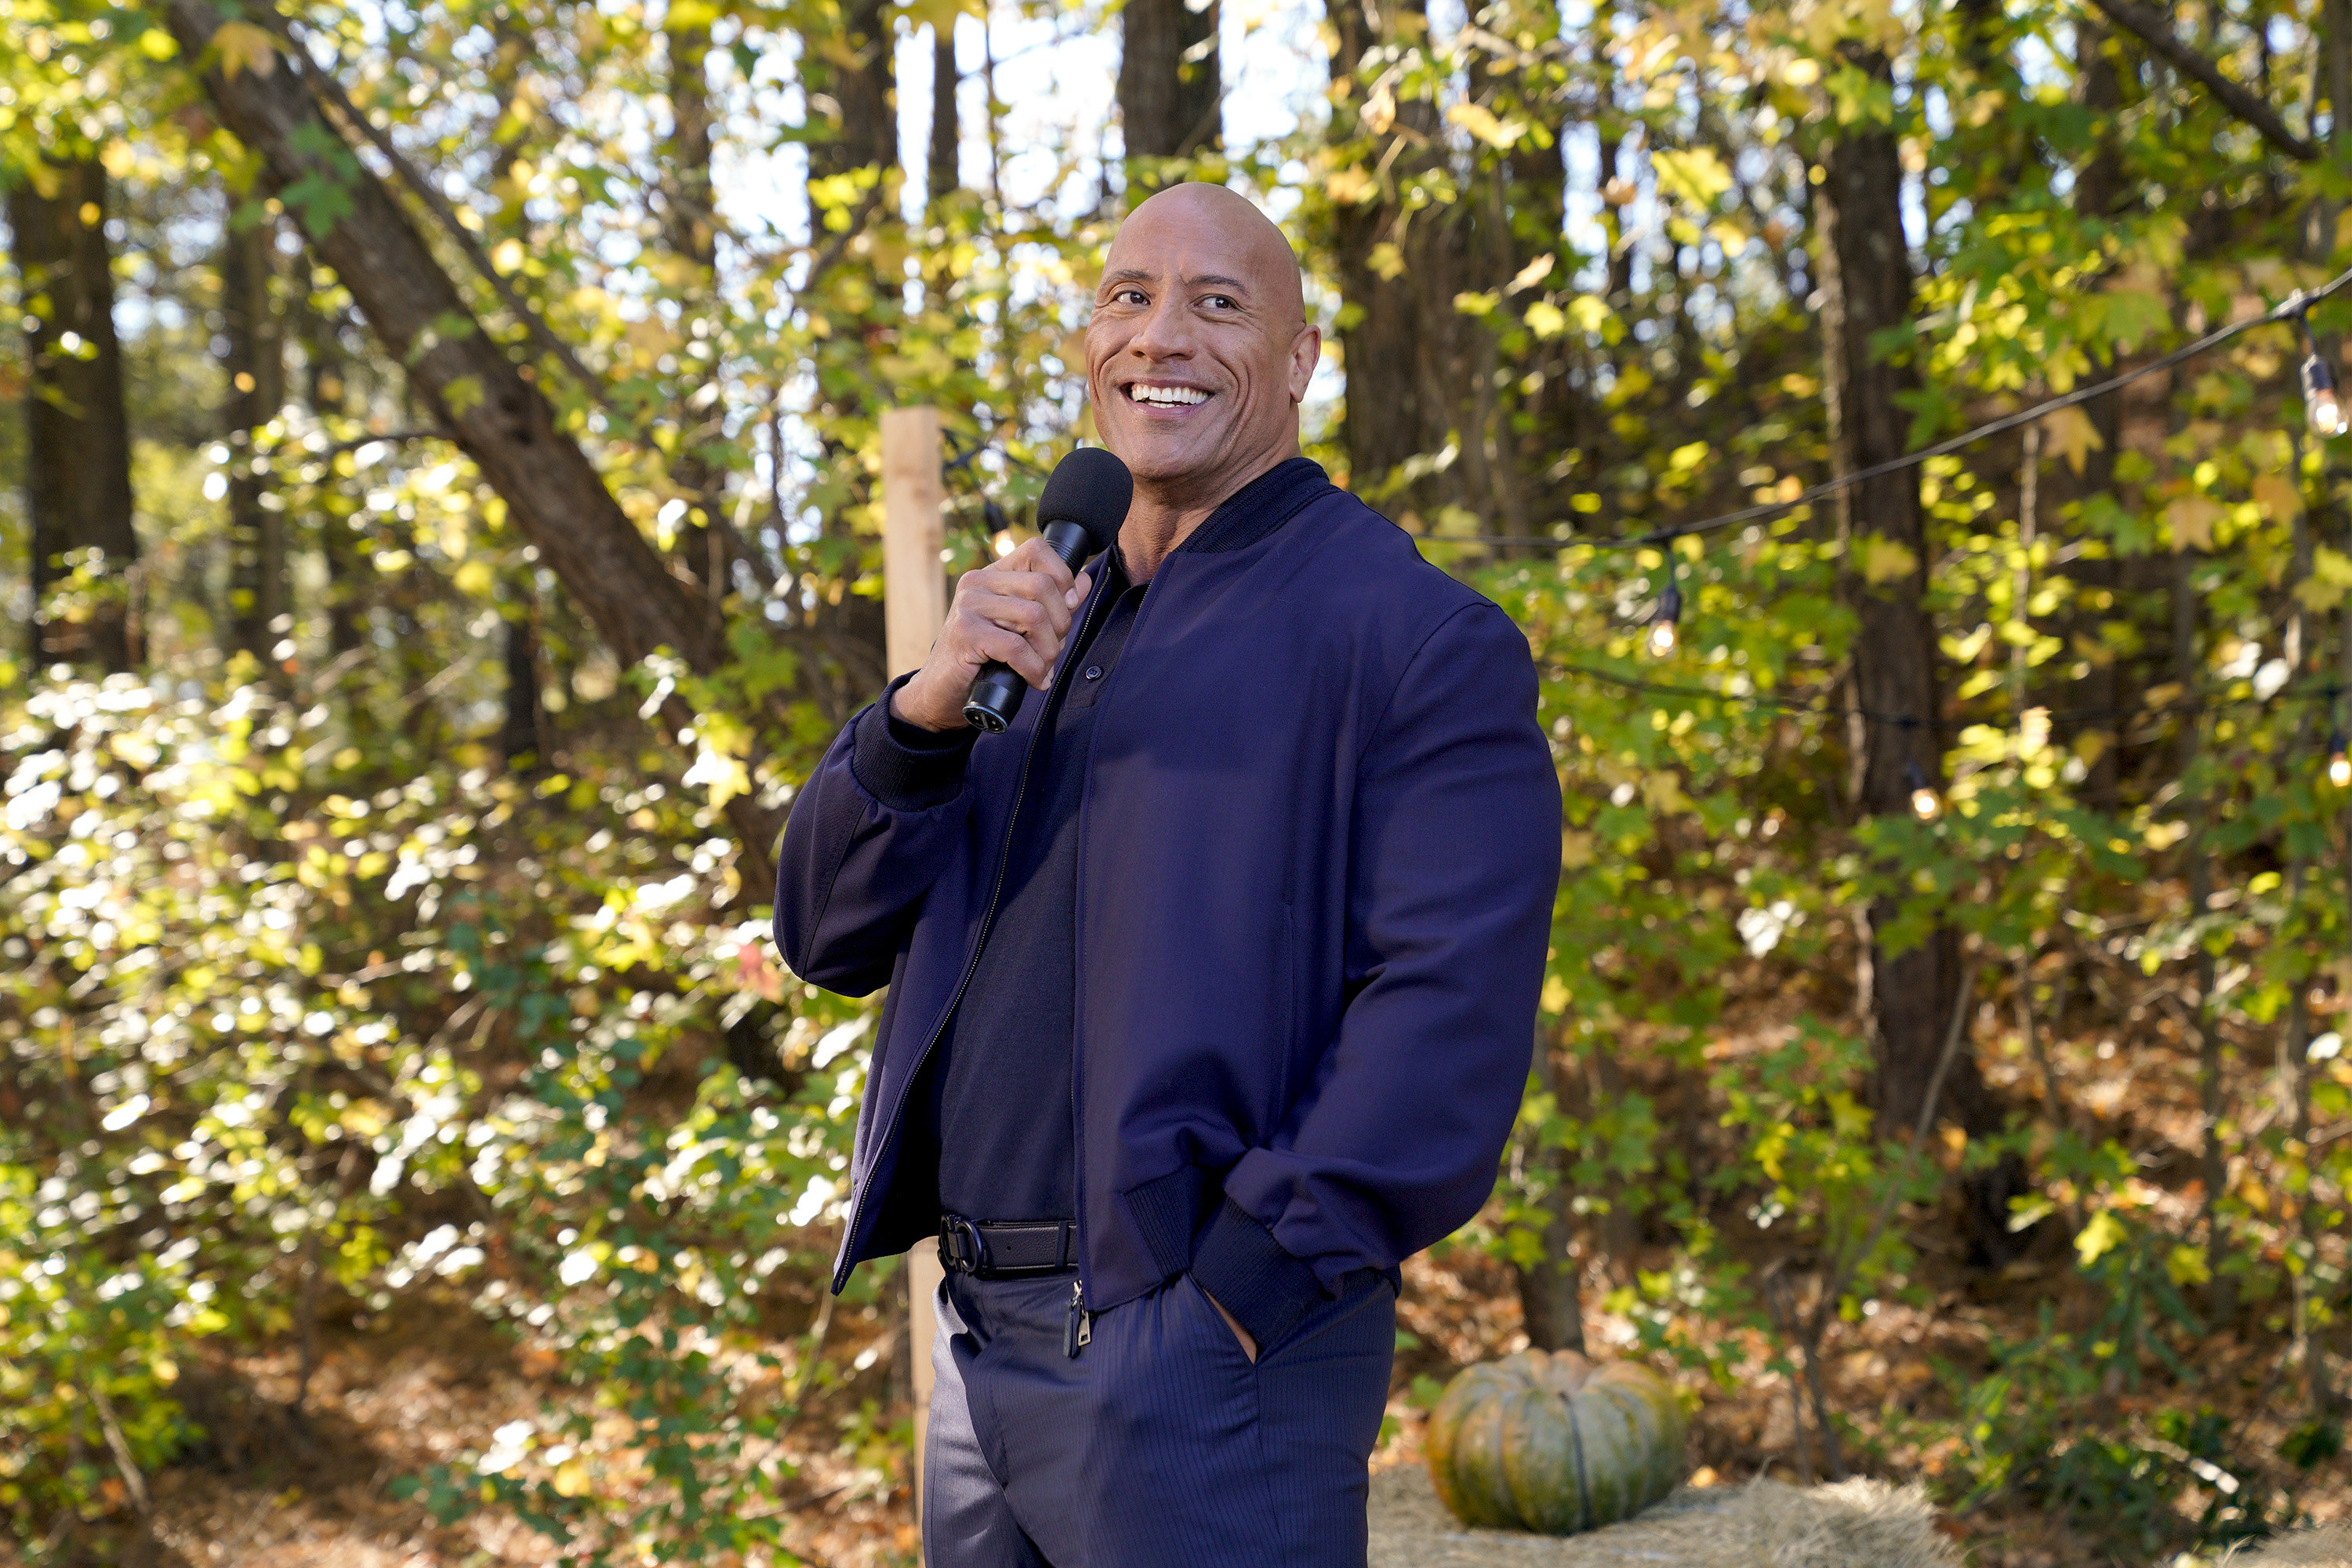 Dwayne Johnson smiling and standing in front of trees